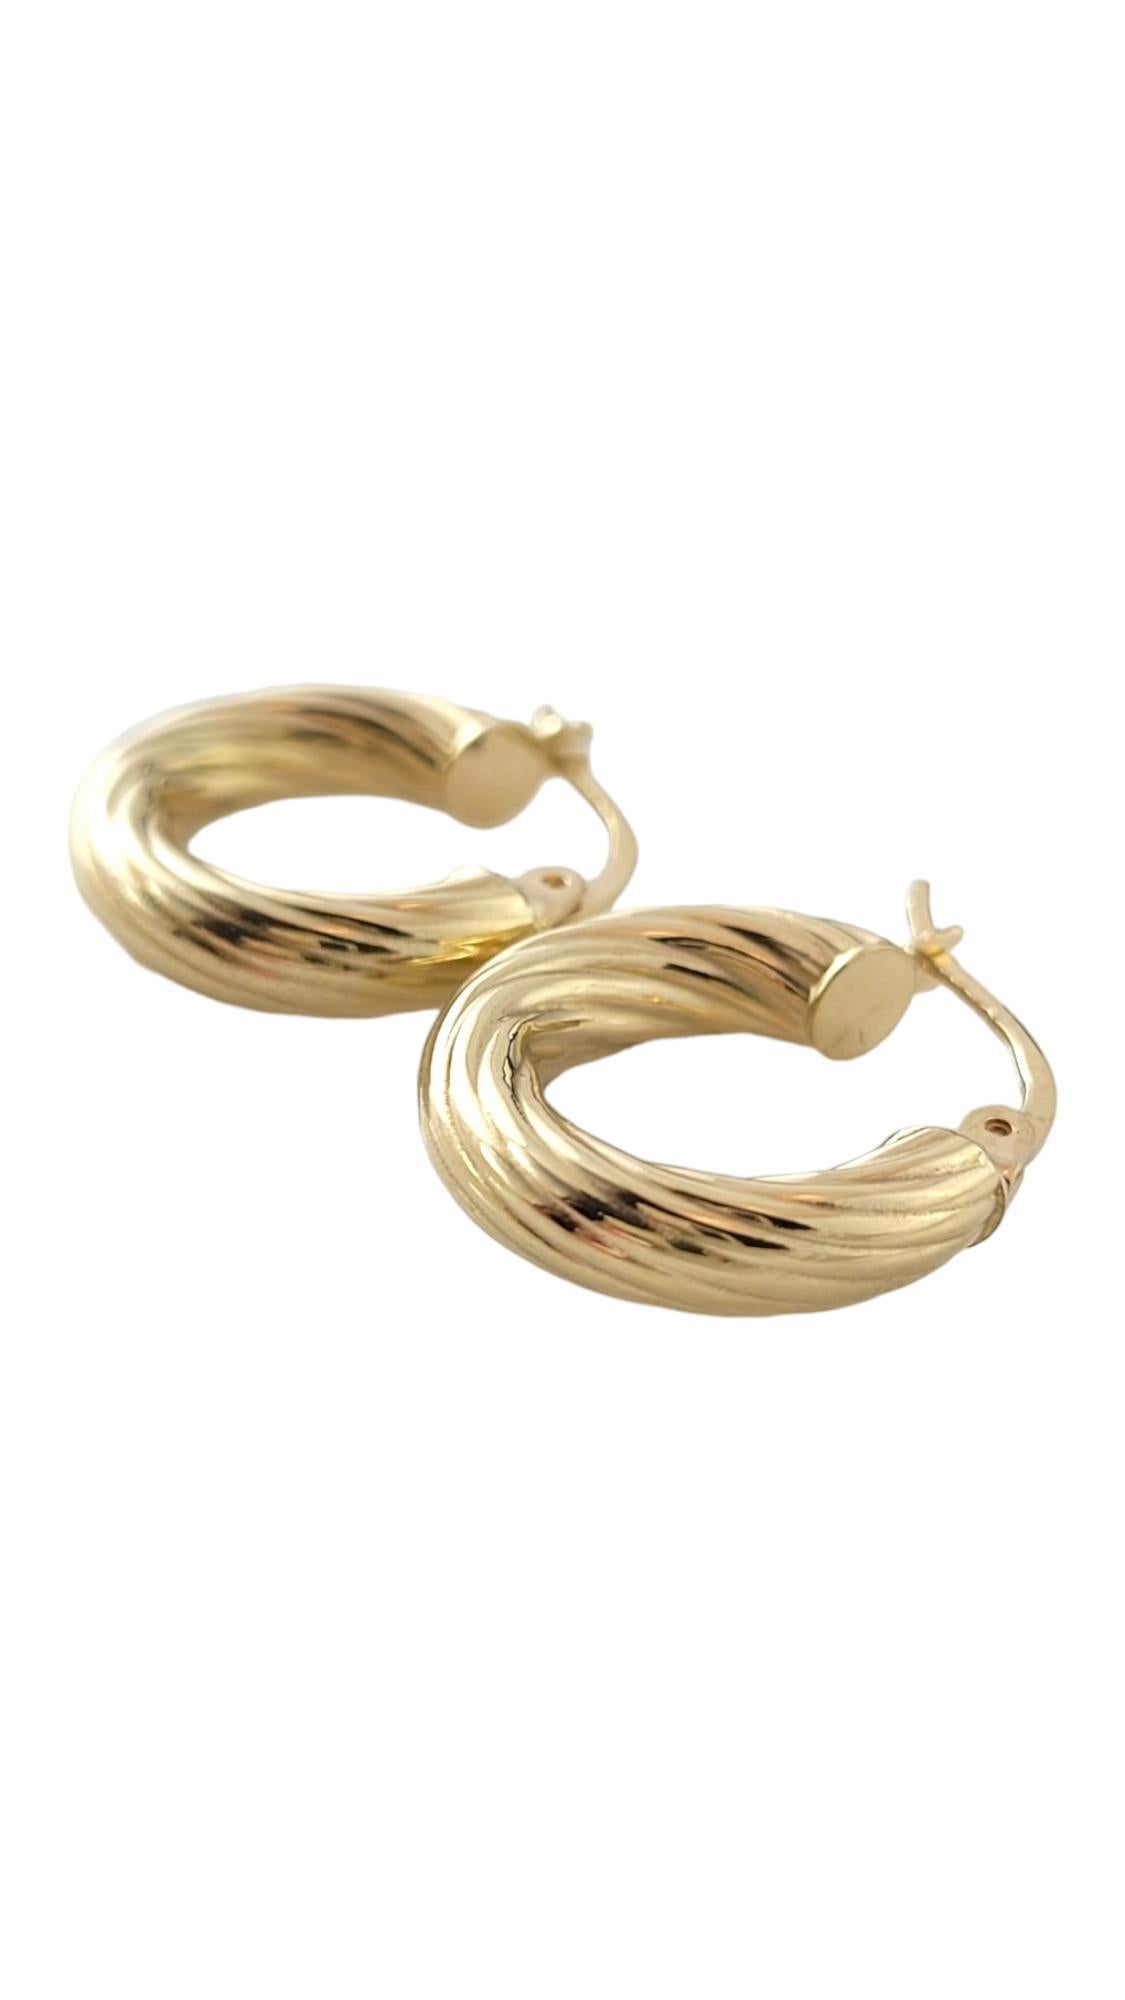 14K Yellow Gold Twisted Hoop Earrings

This gorgeous set of 14K gold hoops are in a beautiful, twisted pattern!

Size: 18.5mm X 4.2mm X 37mm

Weight: 1.1 dwt/ 1.7 g

Hallmark: ITALY ANO 14

Very good condition, professionally polished.

Will come